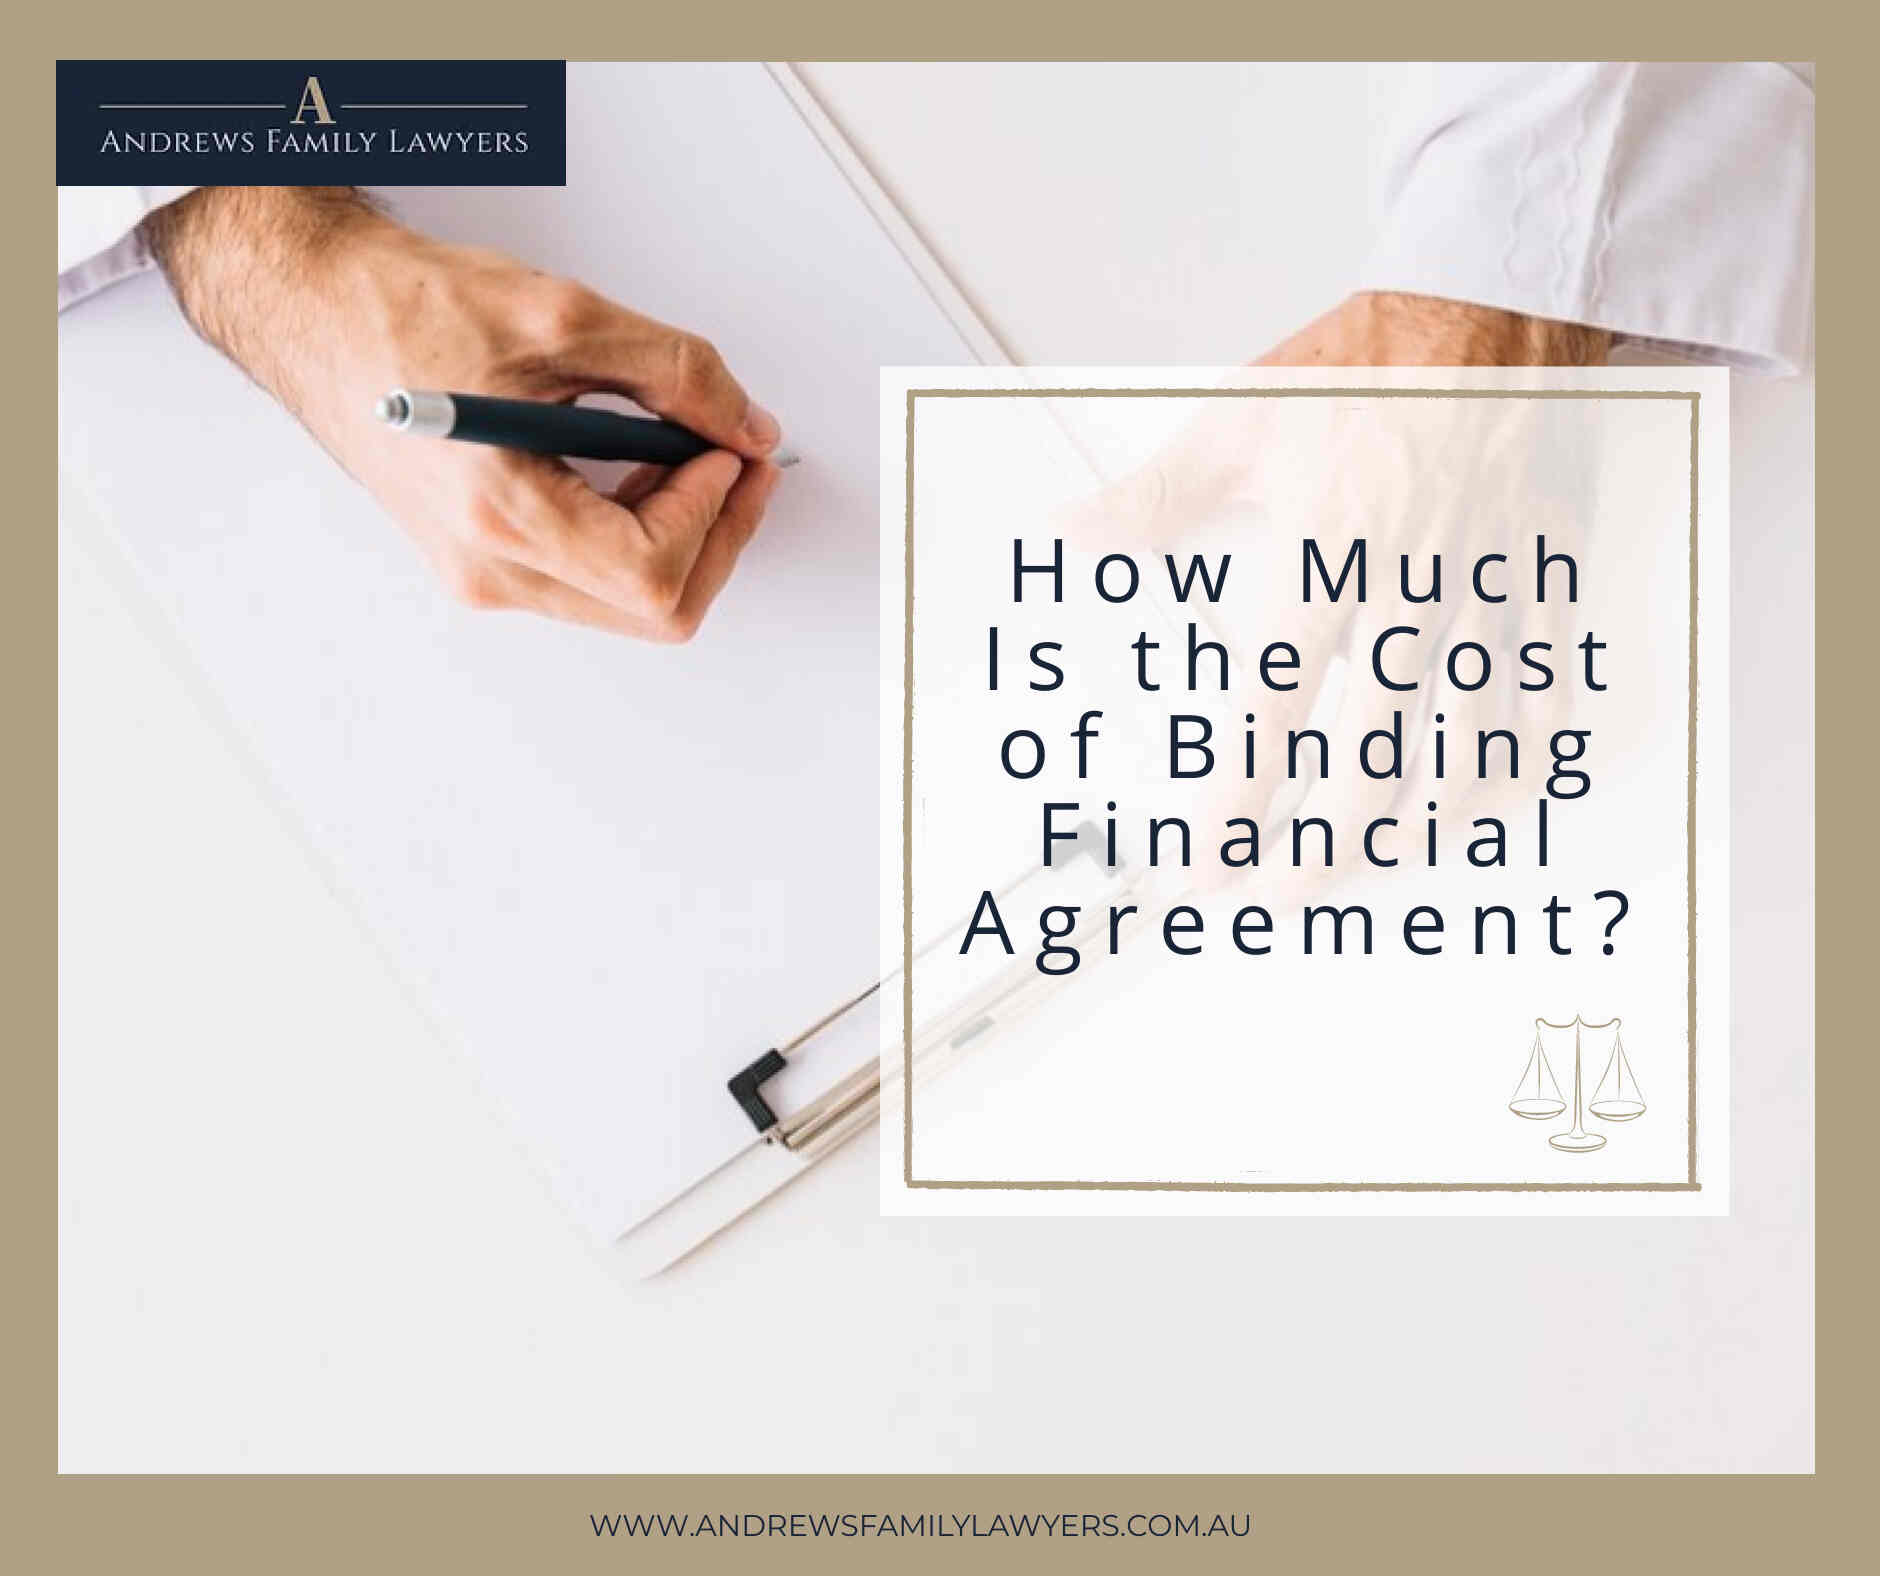 How Much Is the Cost of Binding Financial Agreement